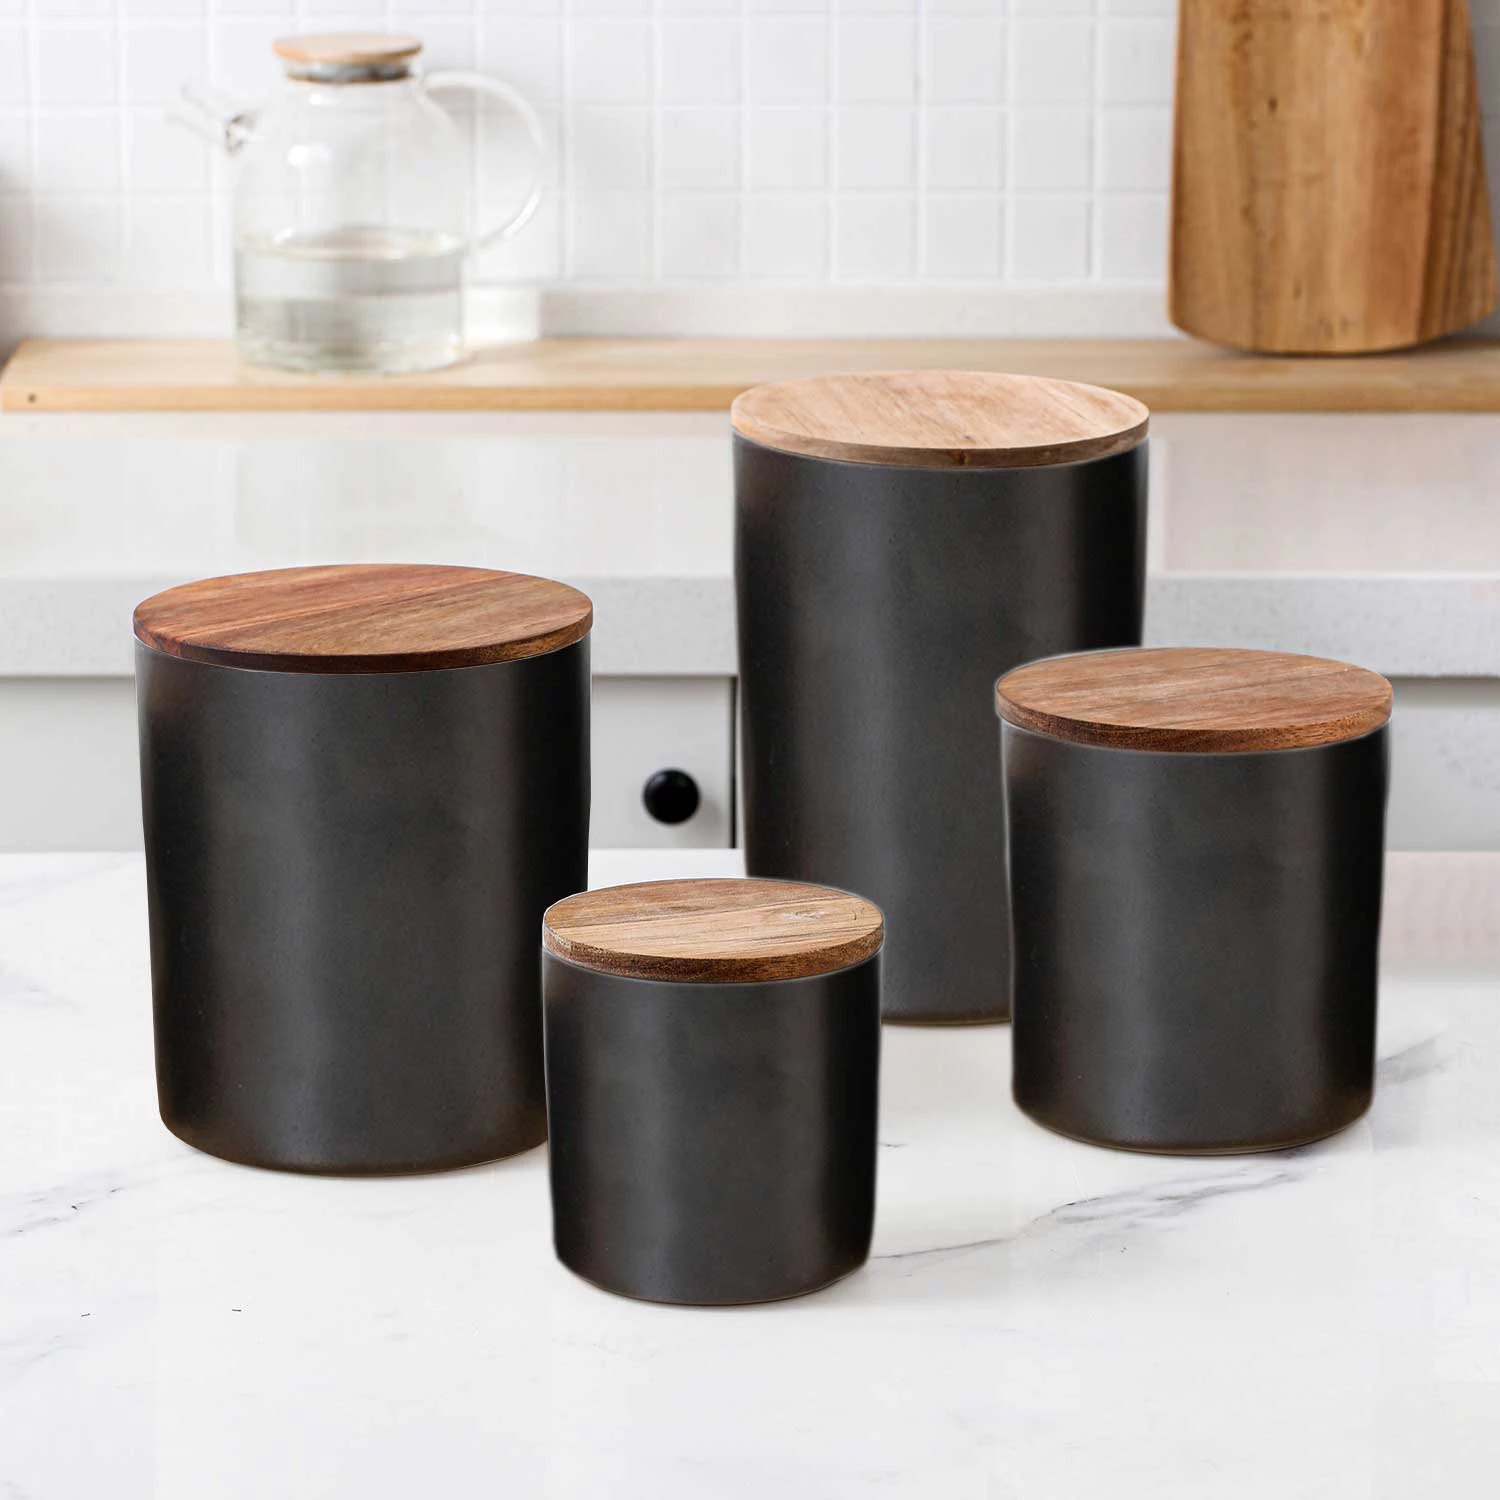 Buy From Fornaxmall.com Canister With Acacia Wood